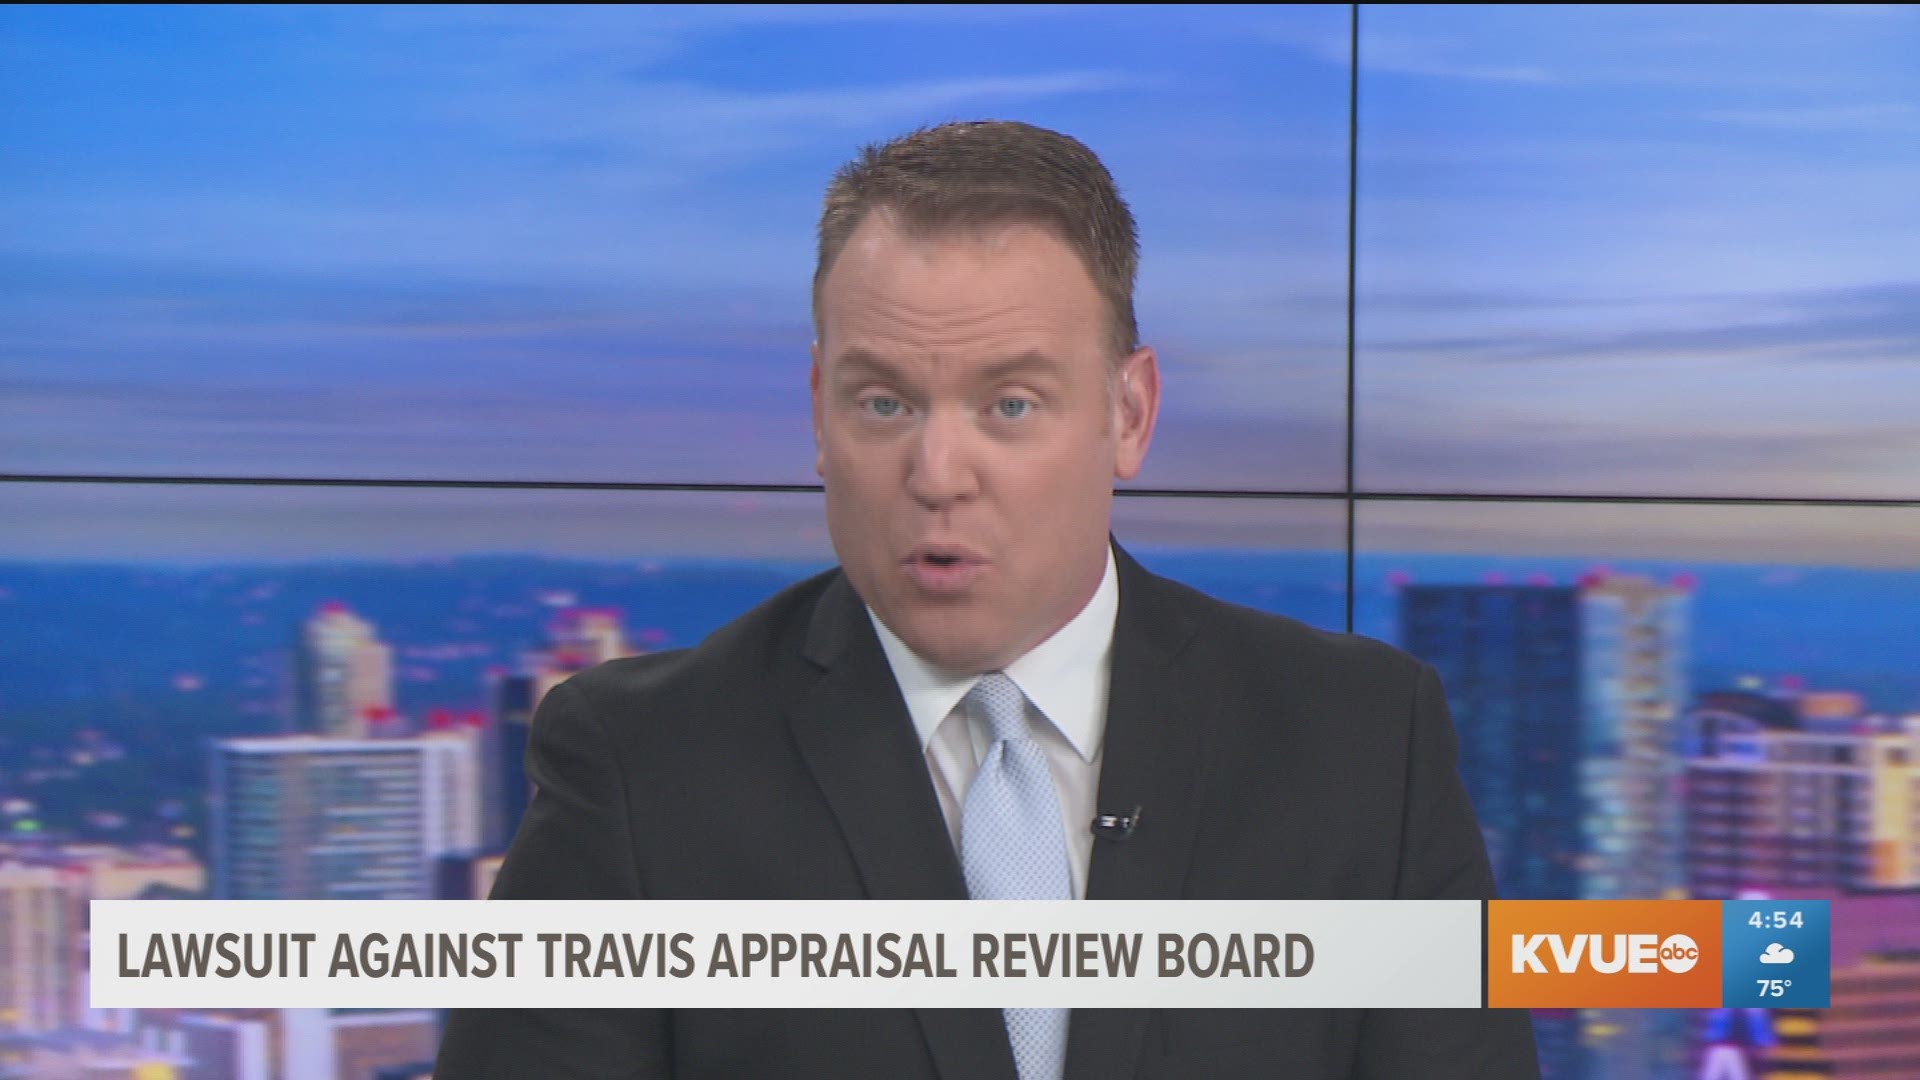 A group of taxpayers have filed a lawsuit against the Travis Appraisal Review board, hoping to see the appraisal process change.